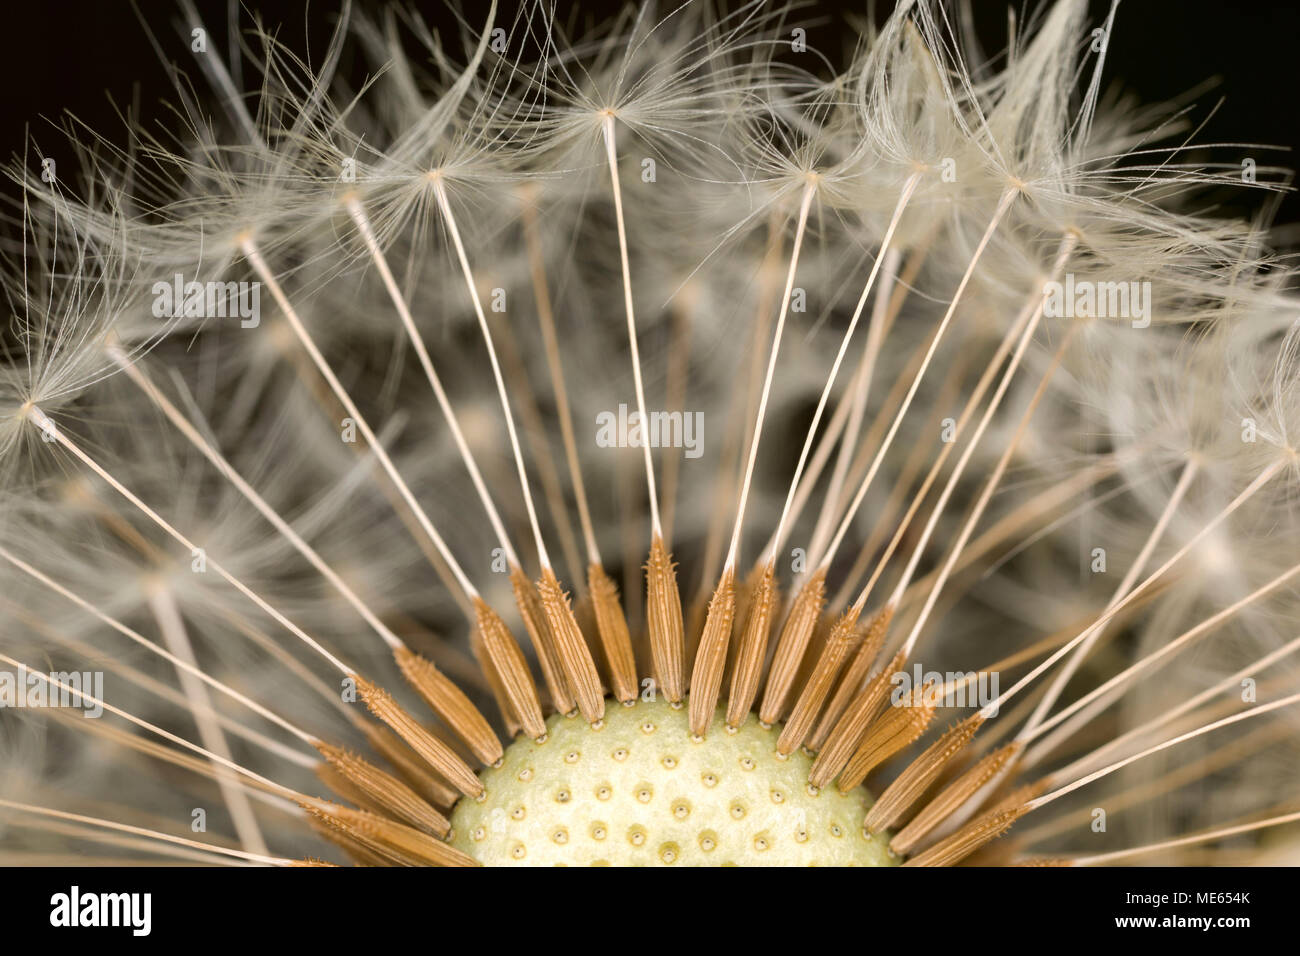 Dandelion seeds and parachute, Taraxacum officinale, on a dandelion seed head found in north Dorset England UK Stock Photo